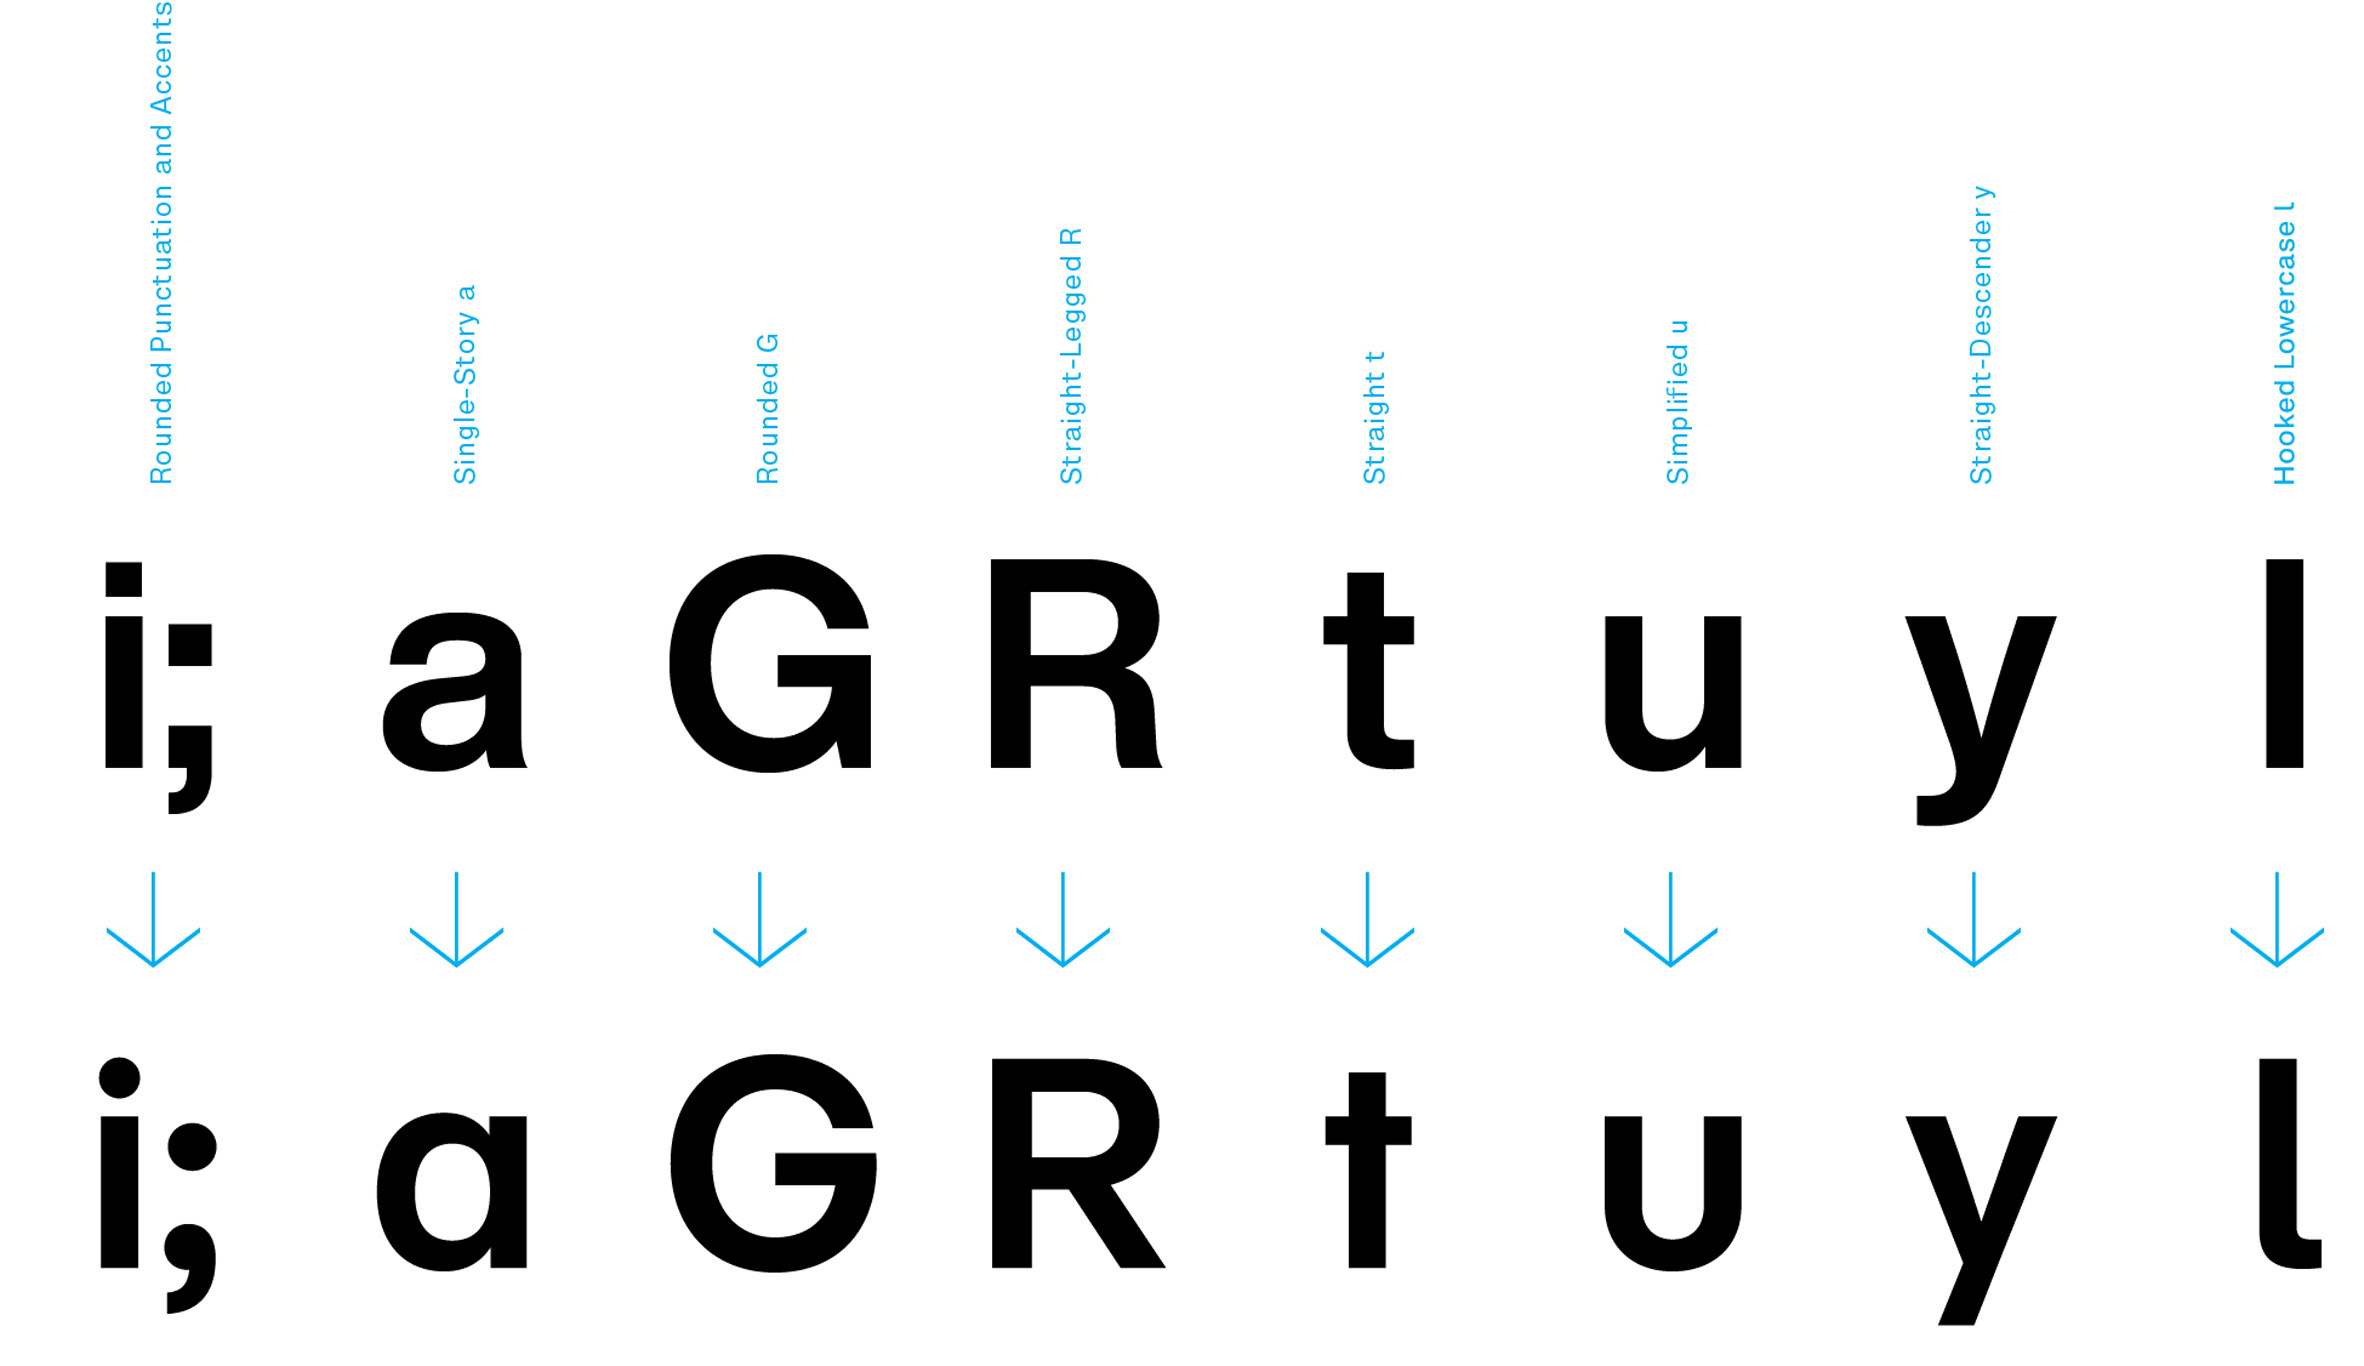 New Typeface Helvetica Now by Monotype